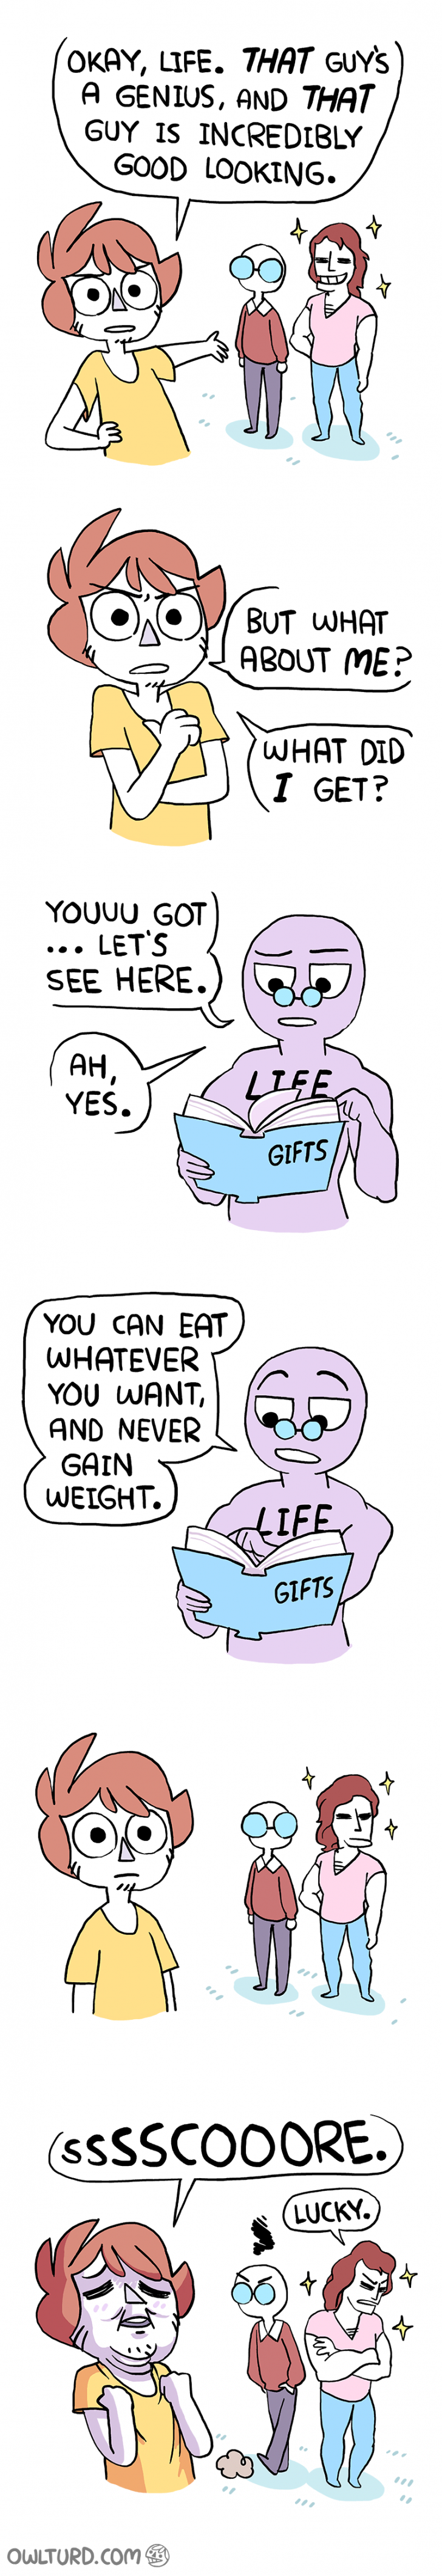 Life's little gifts